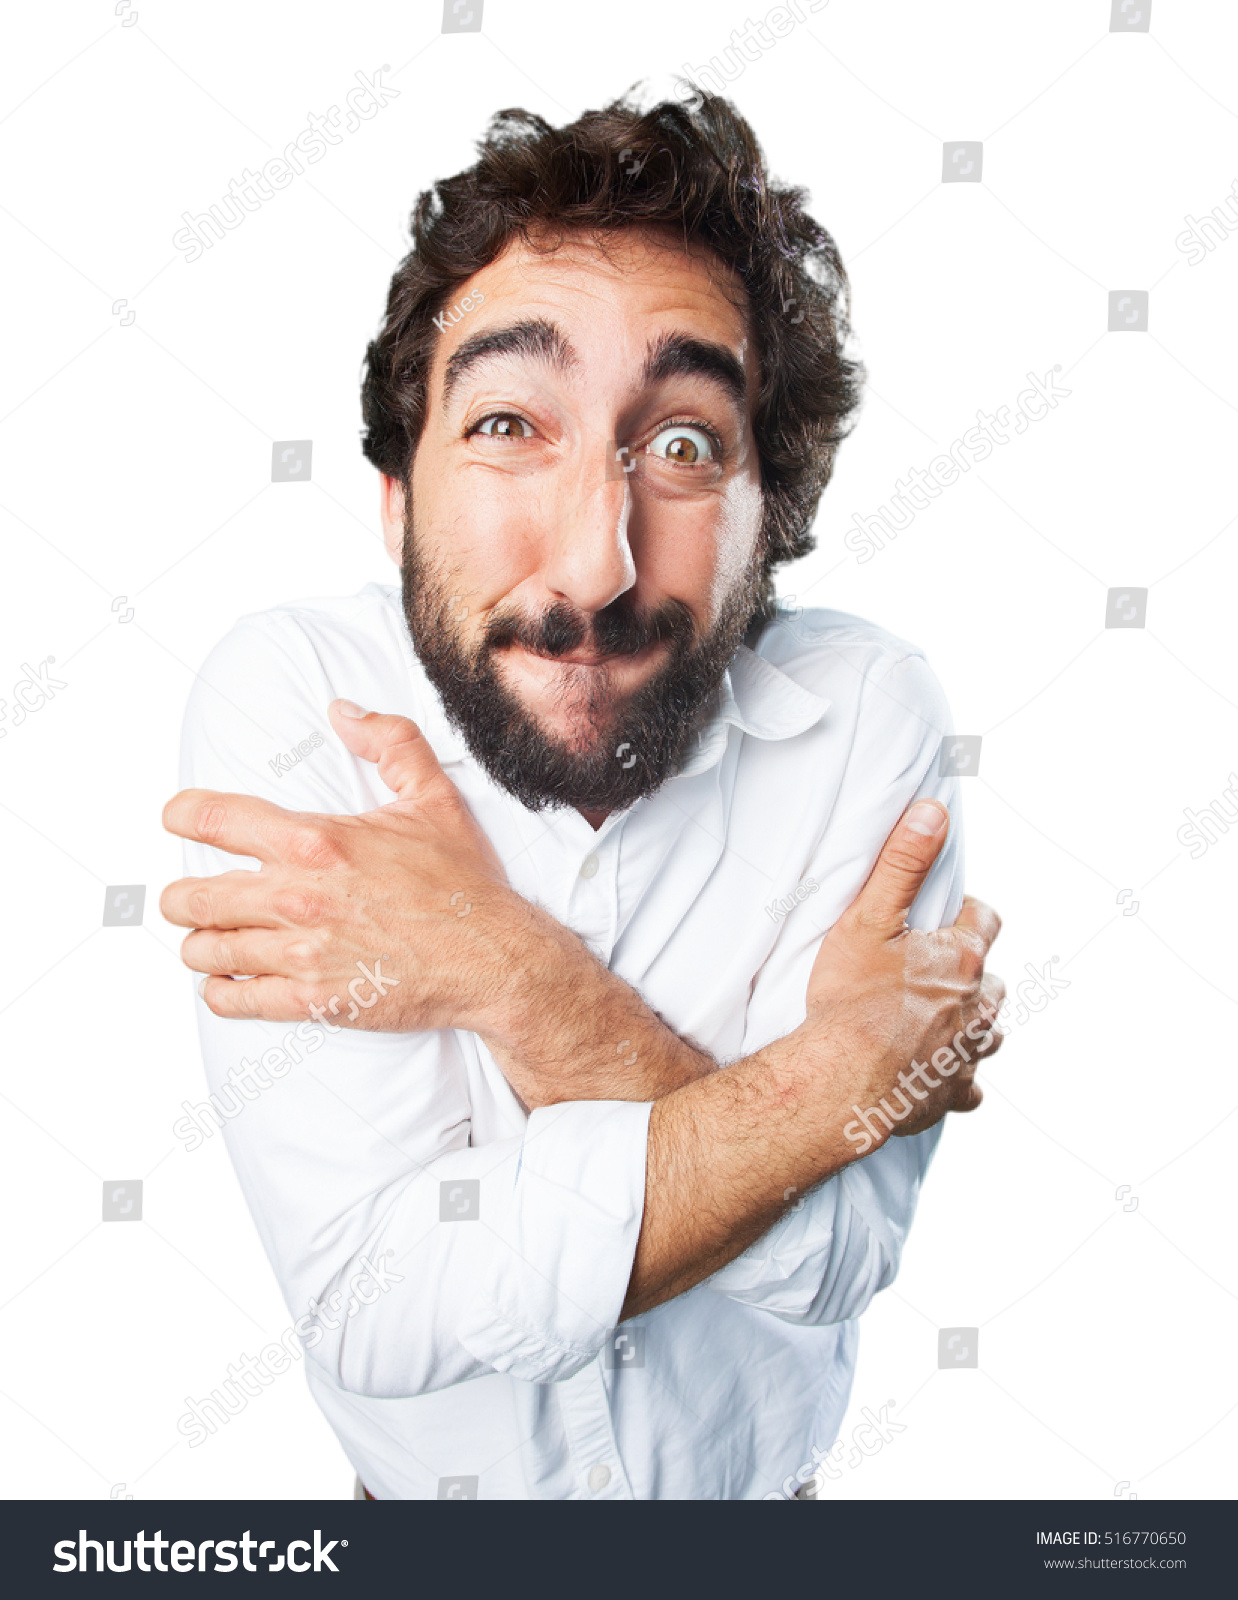 Young Funny Man Scared Worried Pose Stock Photo (Royalty Free ...